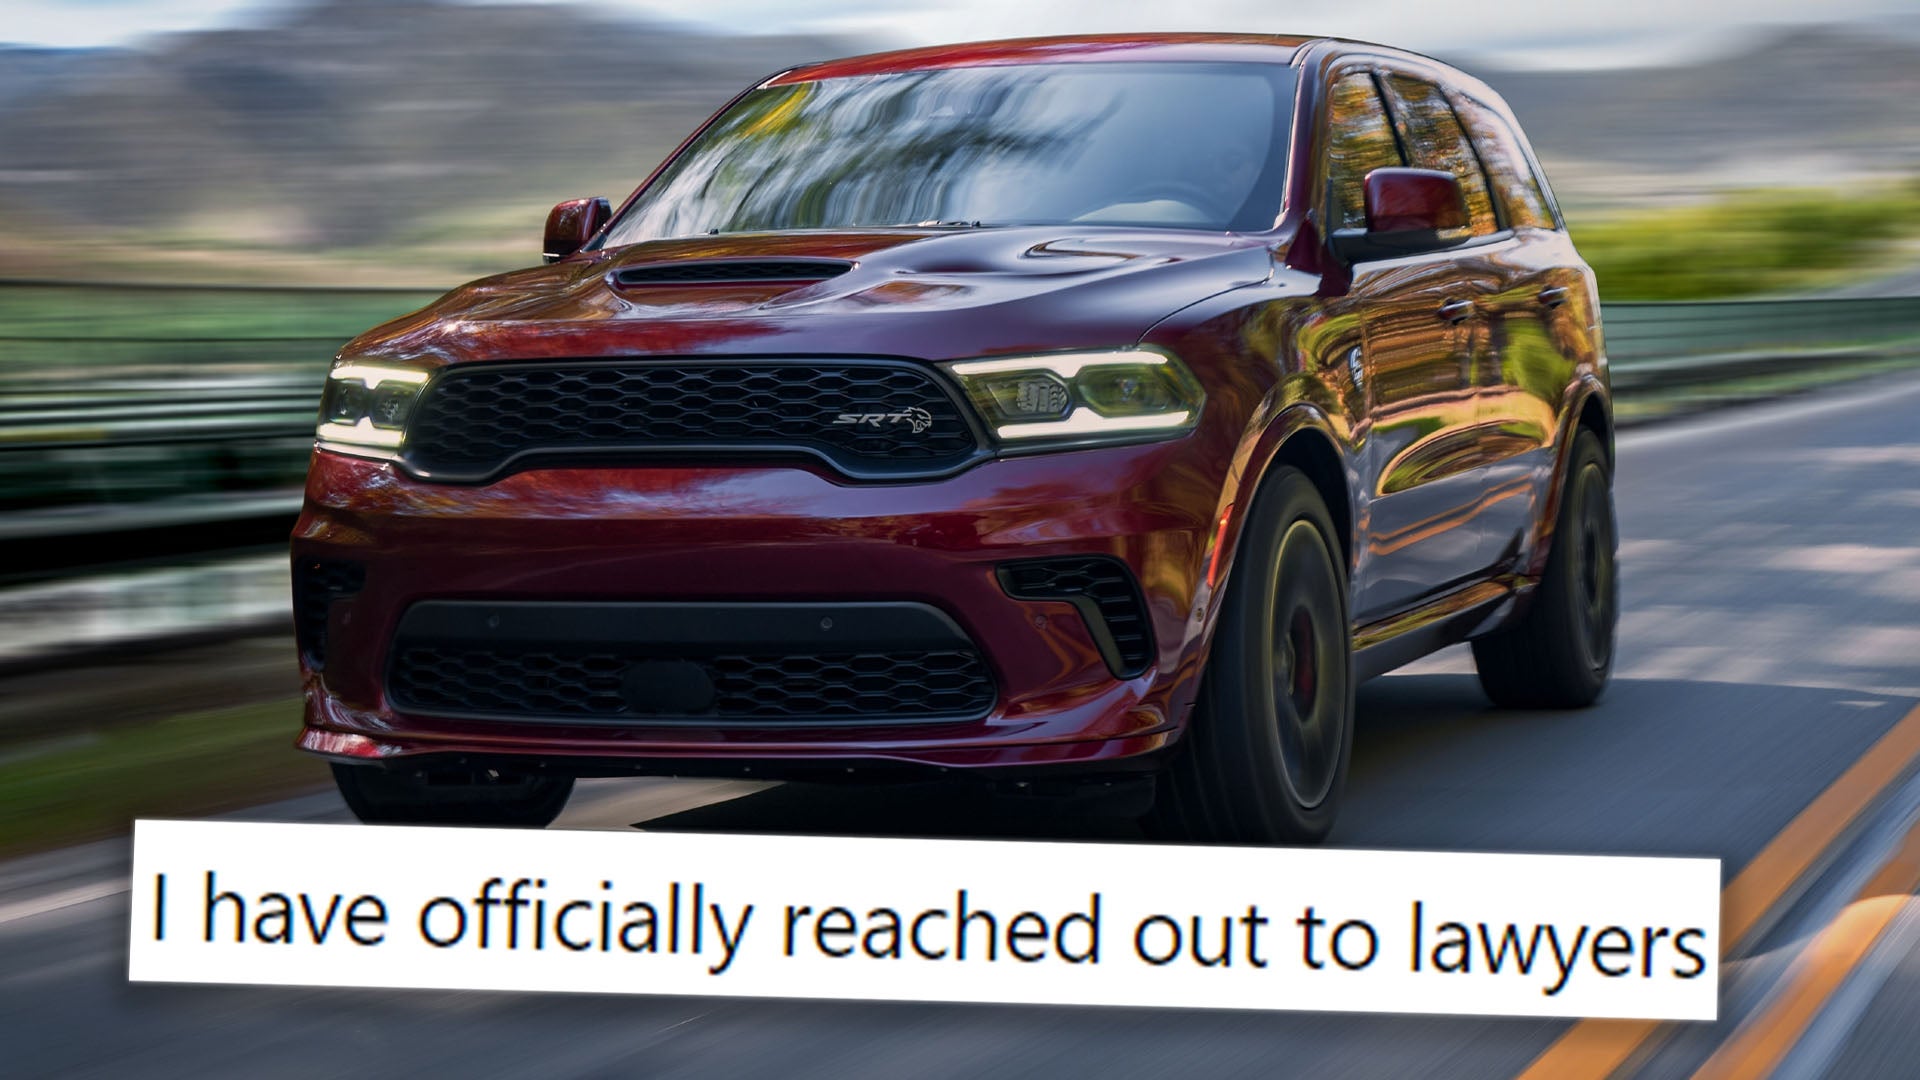 2021 Dodge Durango Hellcat Owners Are Super Mad Dodge Is Bringing It Back for 2023